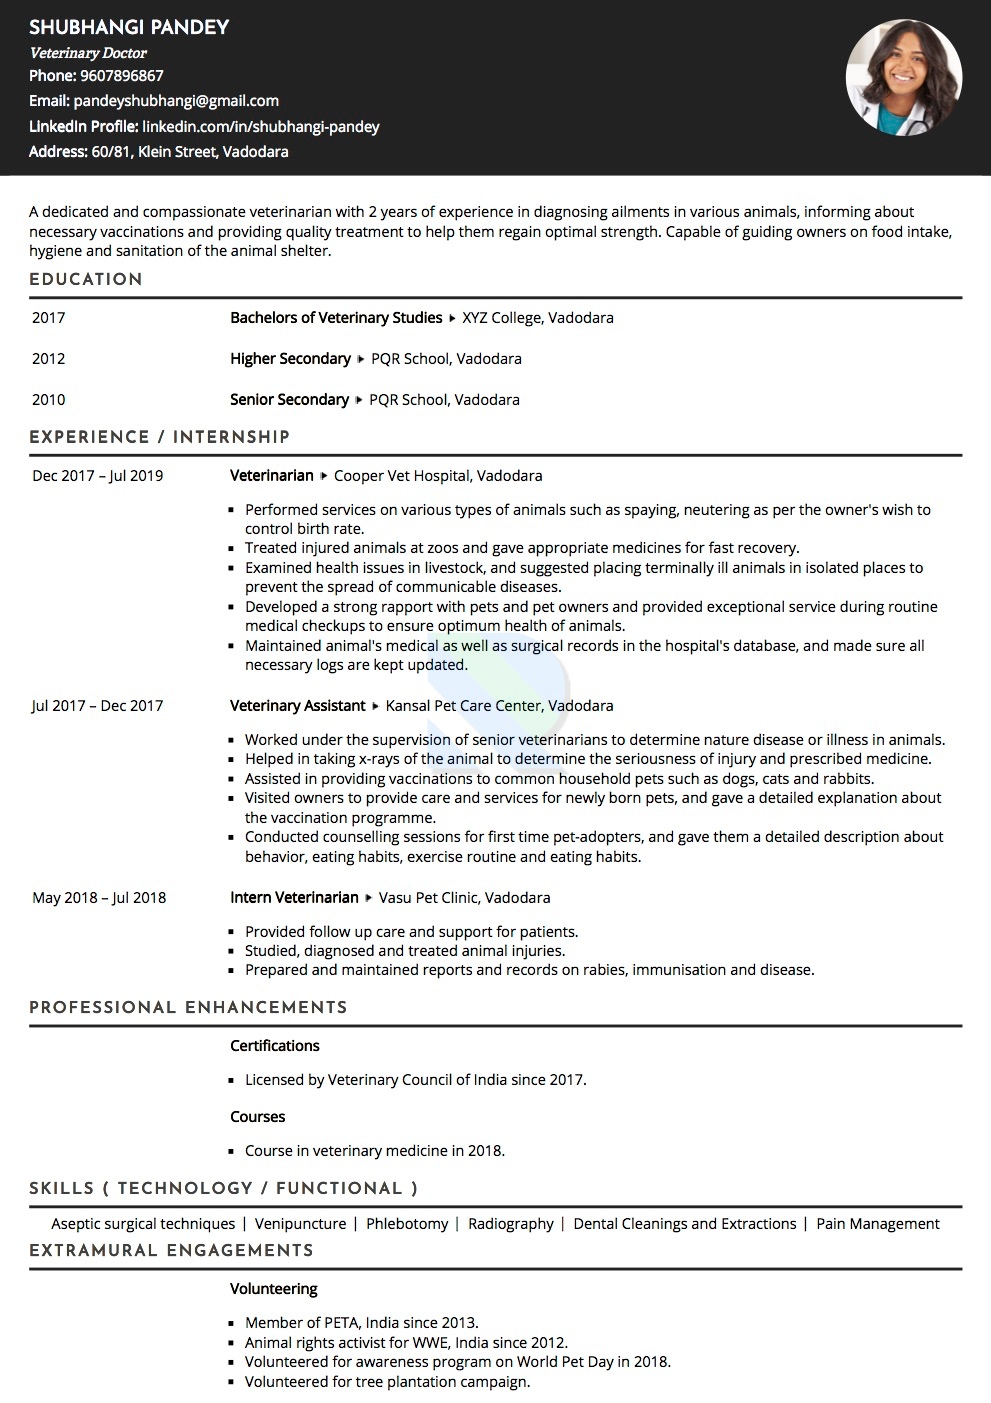 Sample Resume of Veterinary Doctor with Template & Writing Guide |  